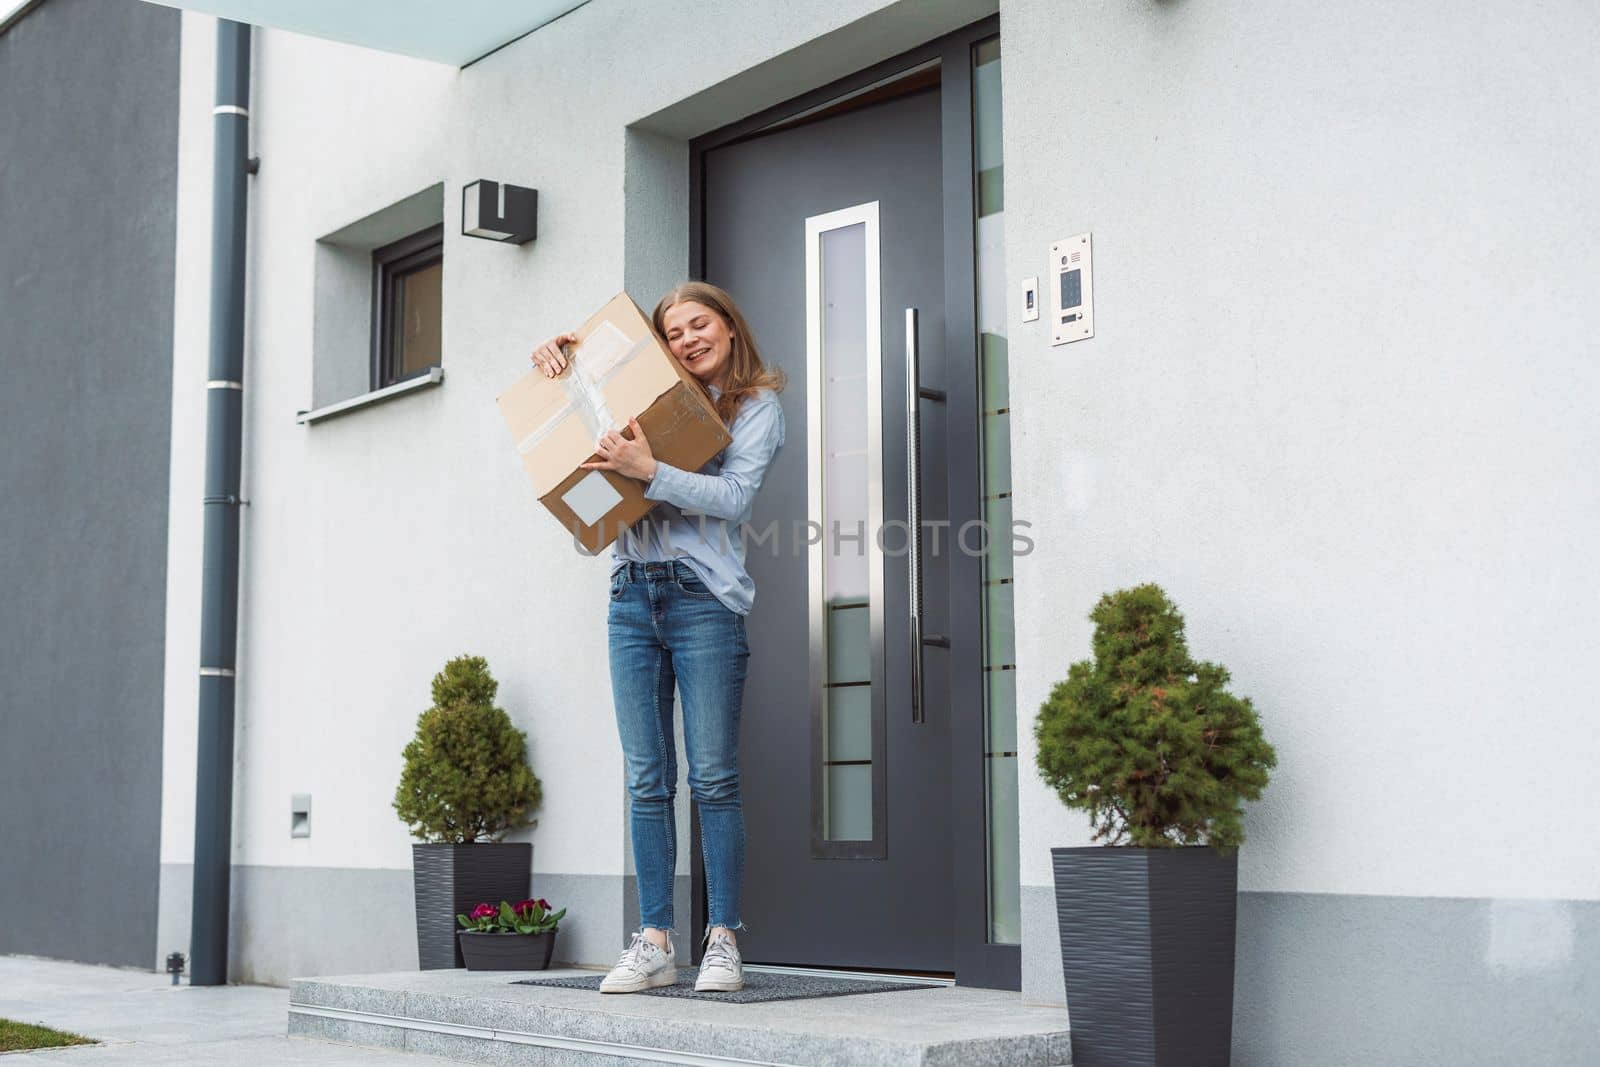 Thrilled caucasian woman standing at the front door with a big cardboard box that just came in the mail. Woman receiving an exciting package, holding it in her arms.